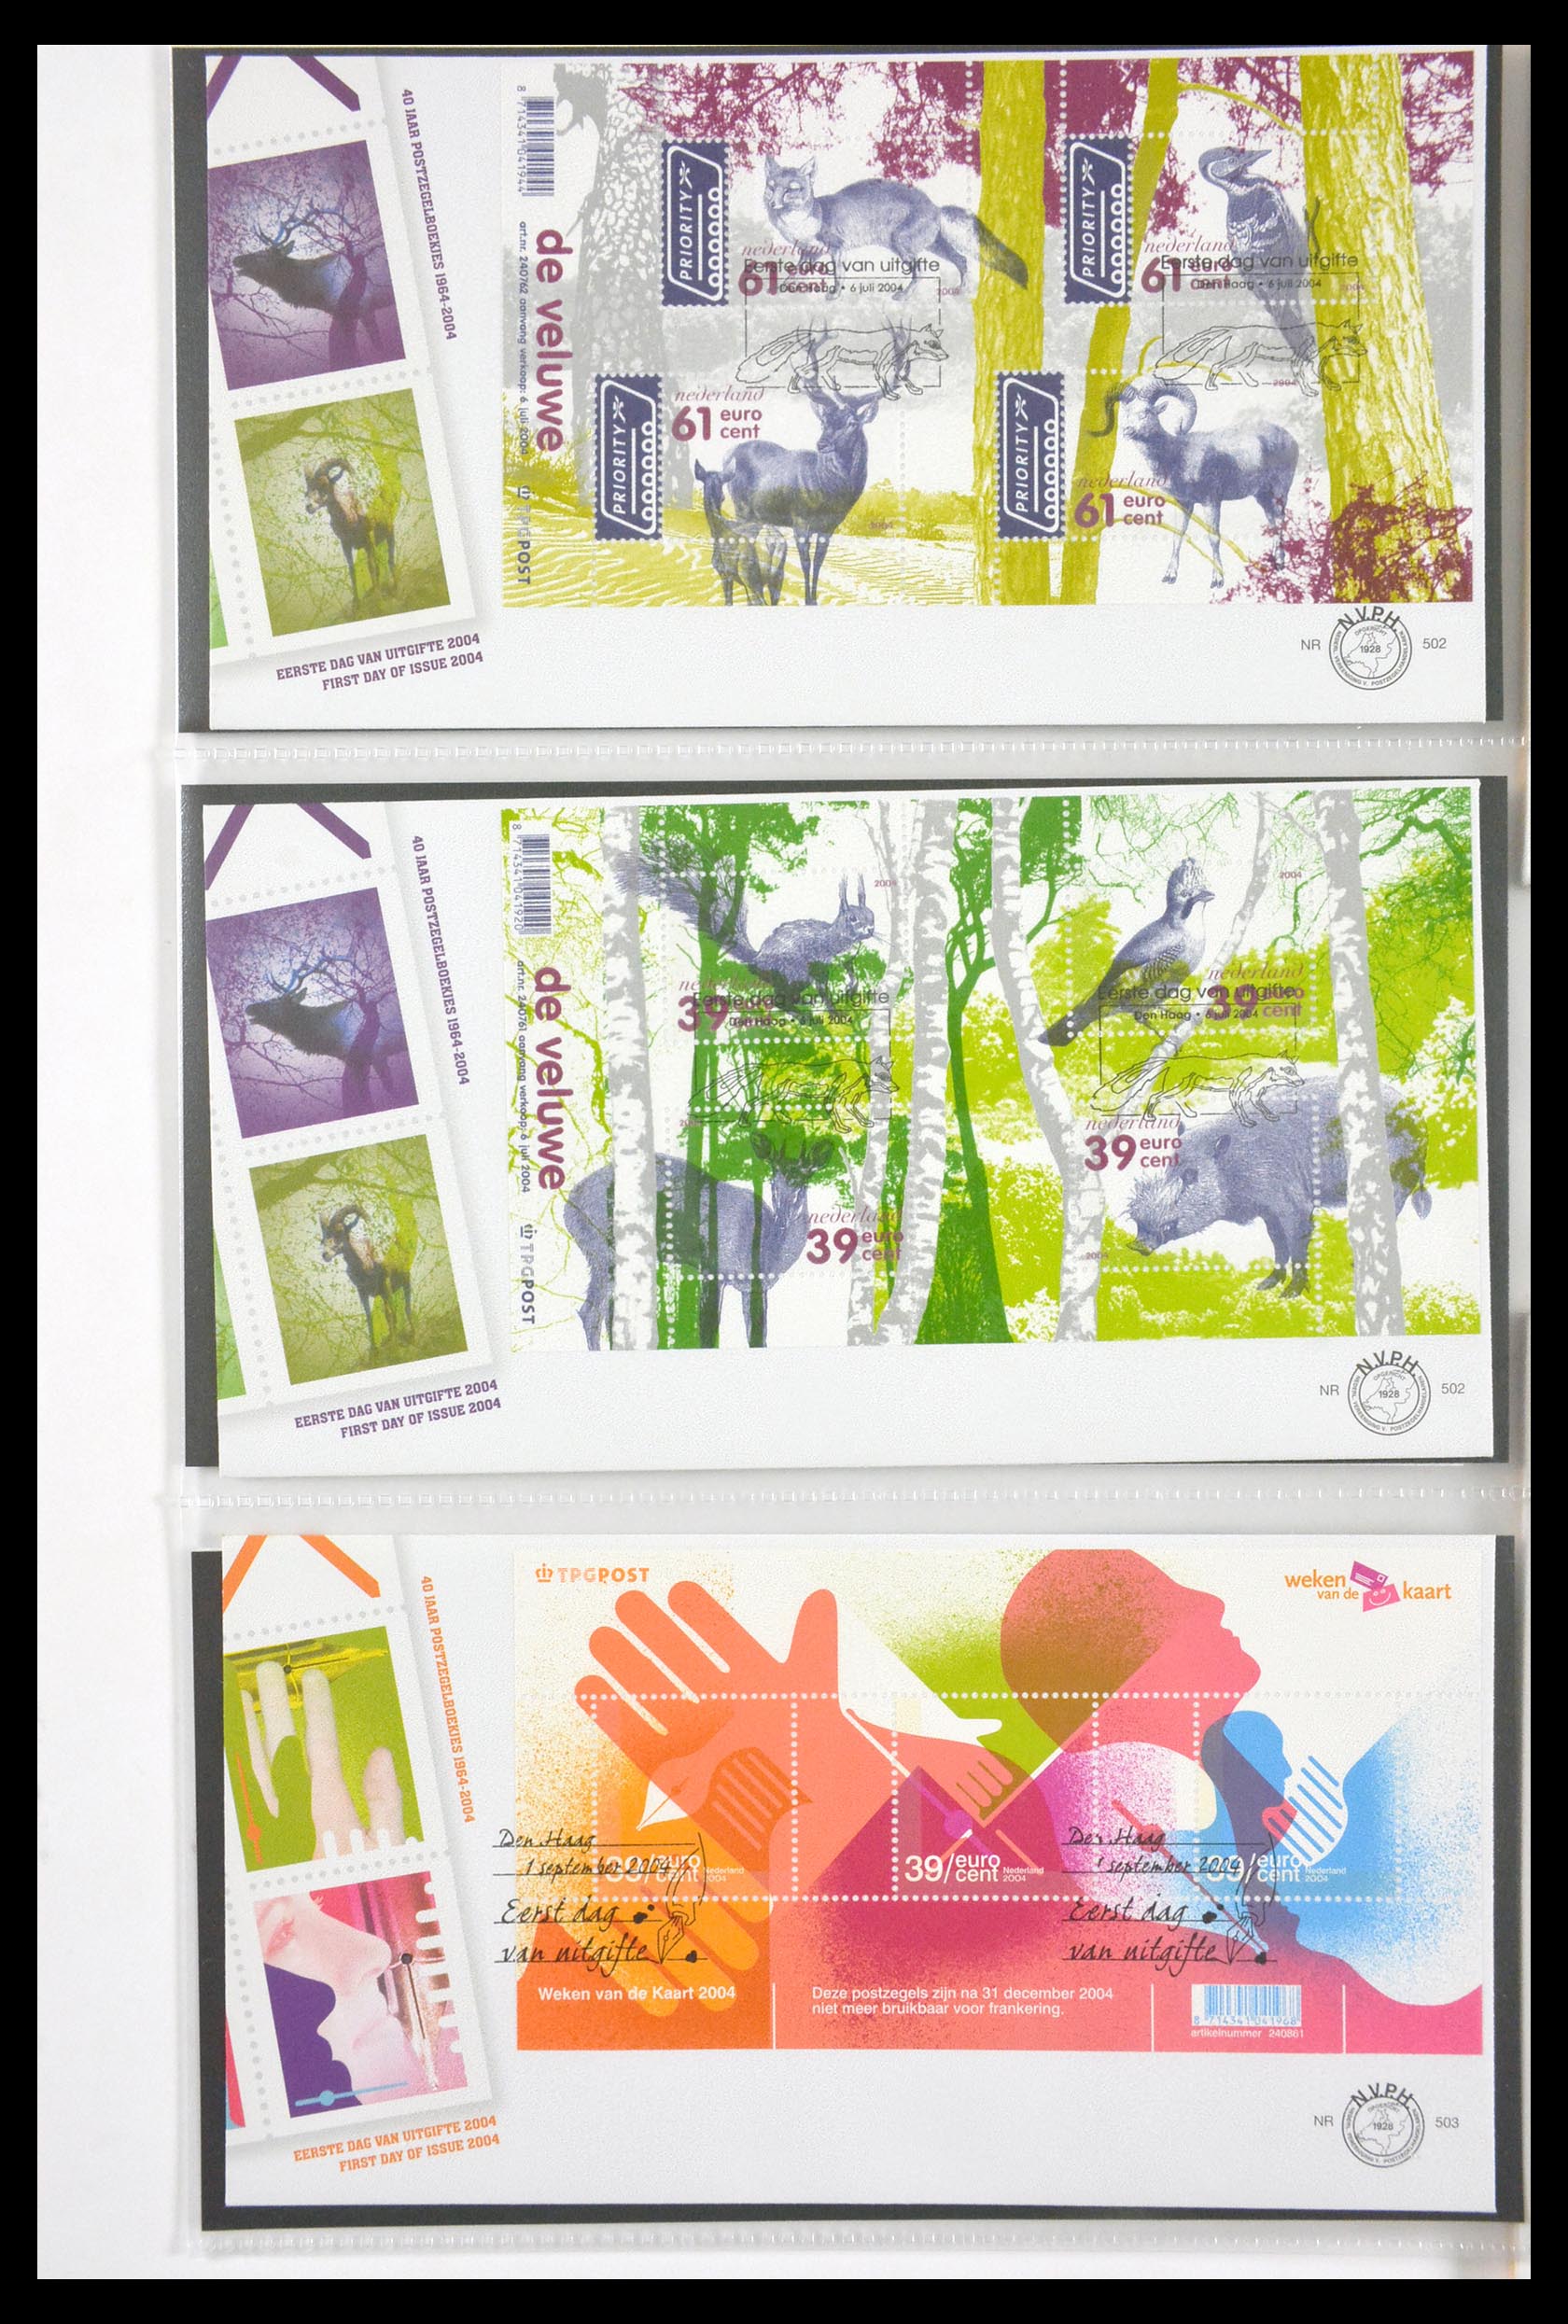 29666 062 - 29666 Netherlands 1997-2011 FDC's.